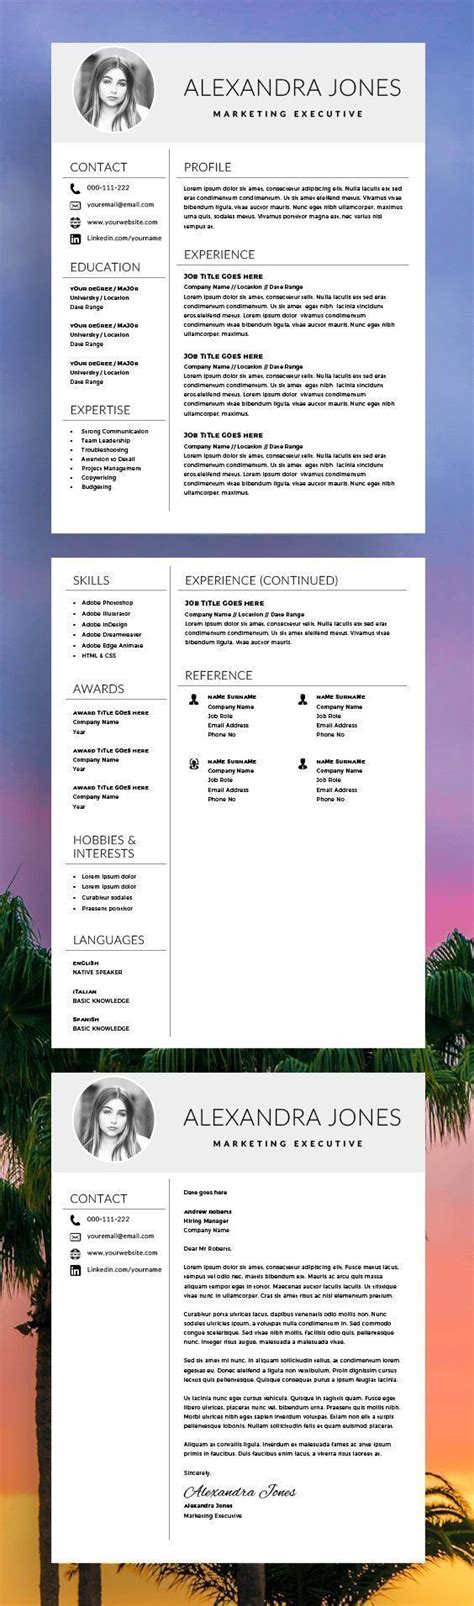 Cv templates that makes you stand out from all the other applicants. Nurse Resume Template - Medical cv - CV Template + Cover ...